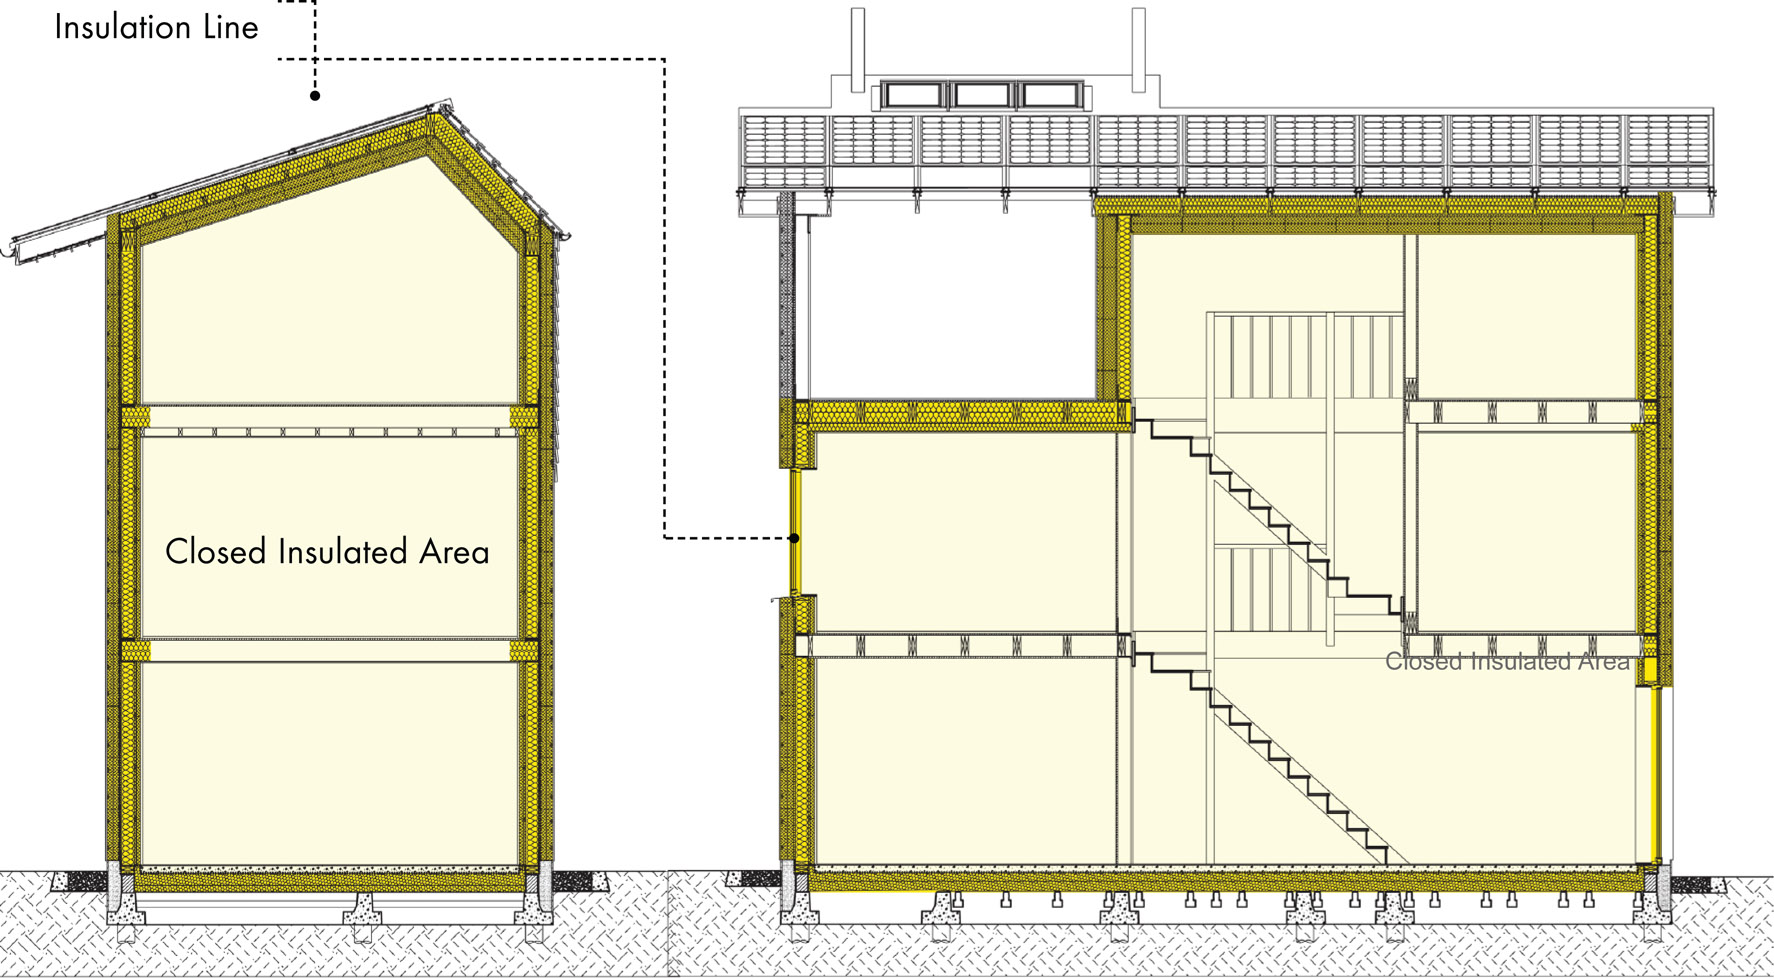 11.12 Thermal envelope strategy on construction drawings.